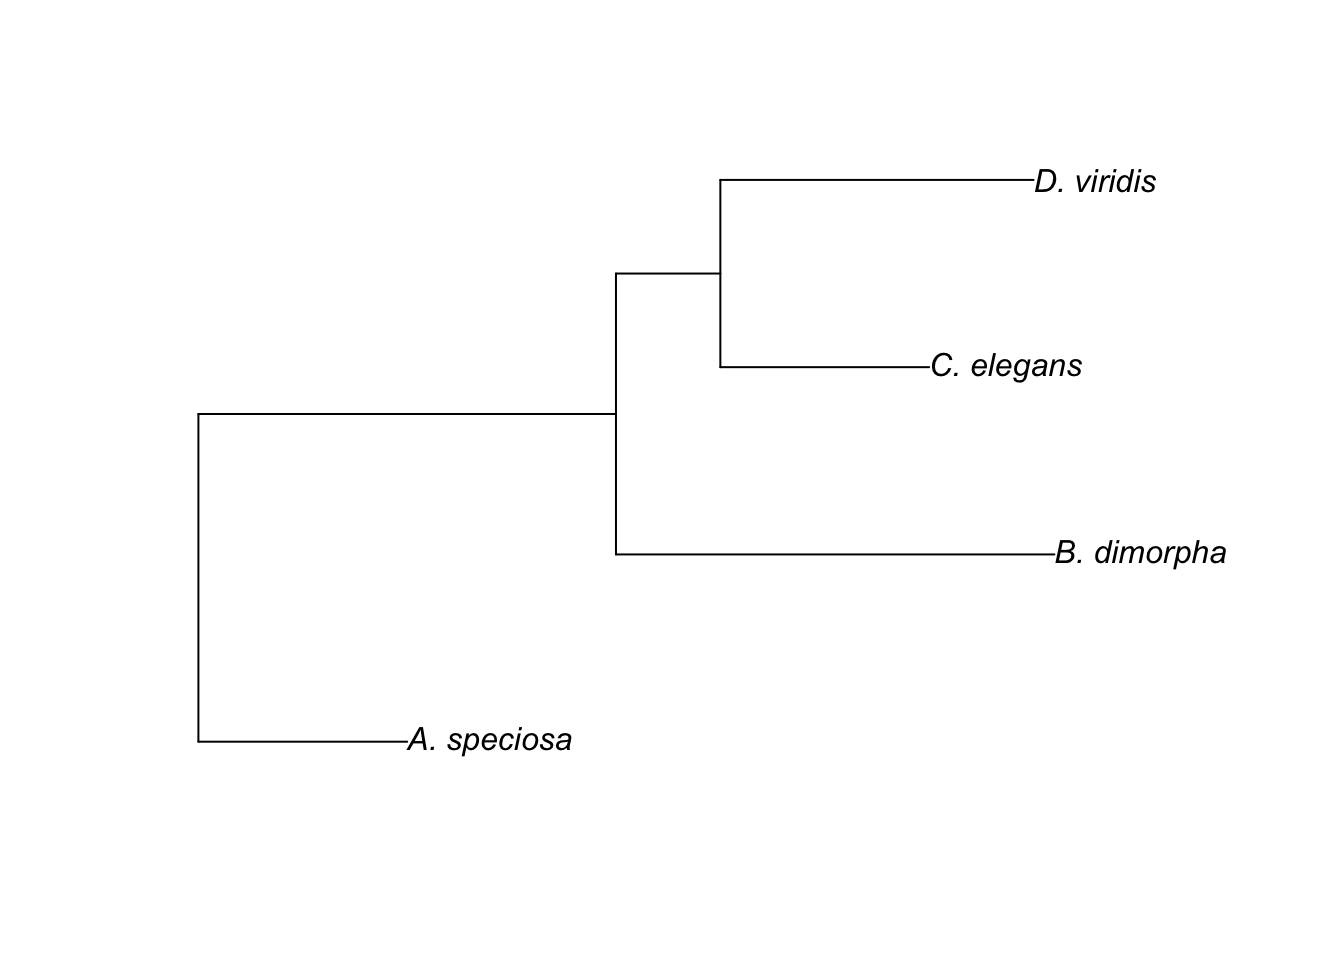 Rooted tree showing relationsip between 4 species with branch lengths.